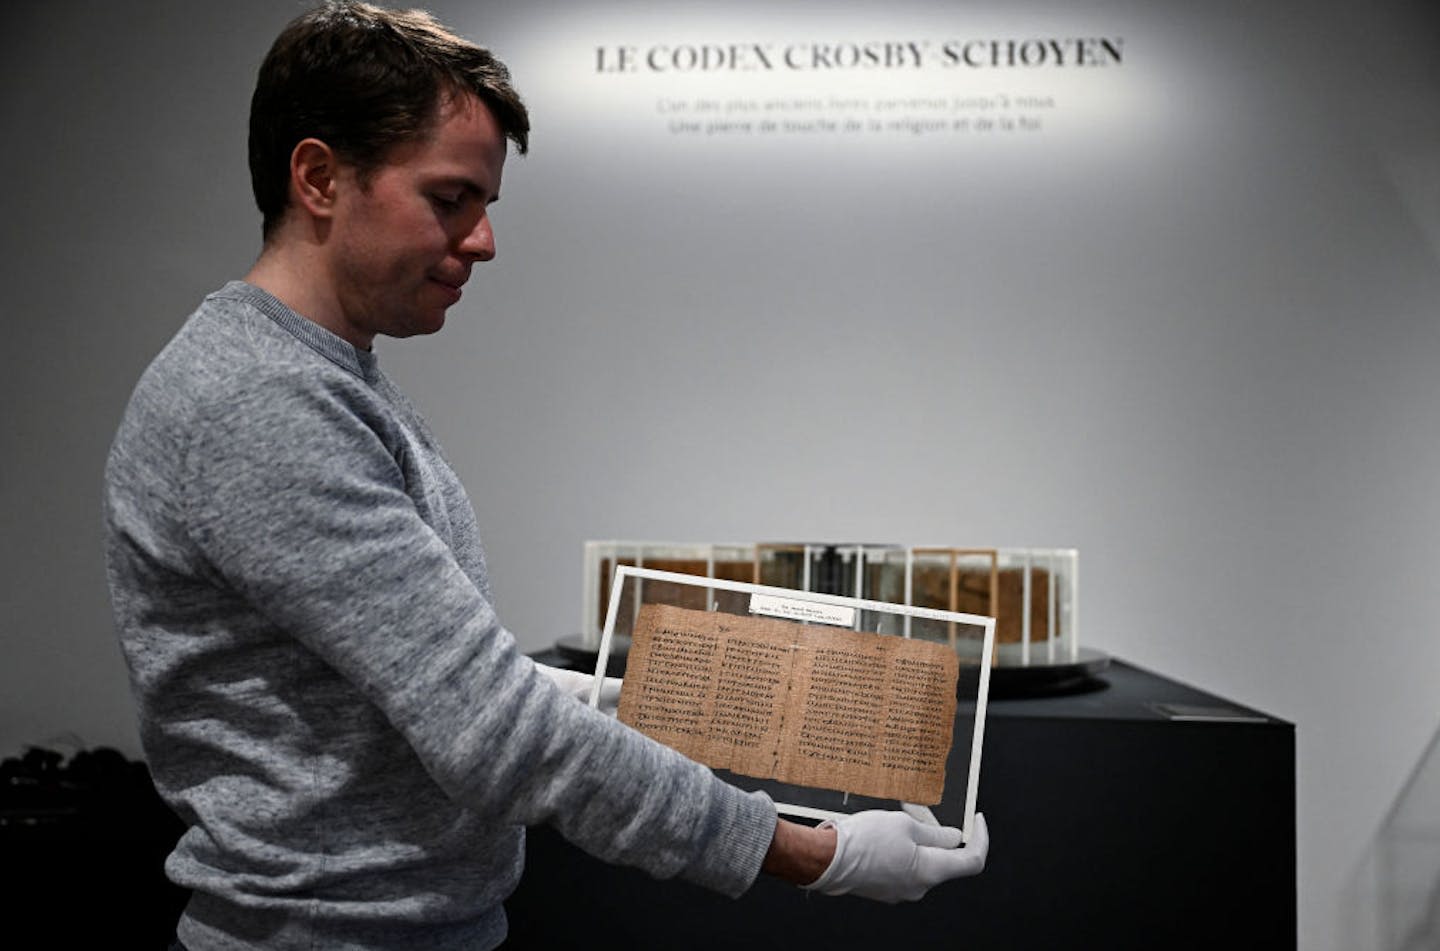 An ancient manuscript up for sale gives a glimpse into the history of early Christianity